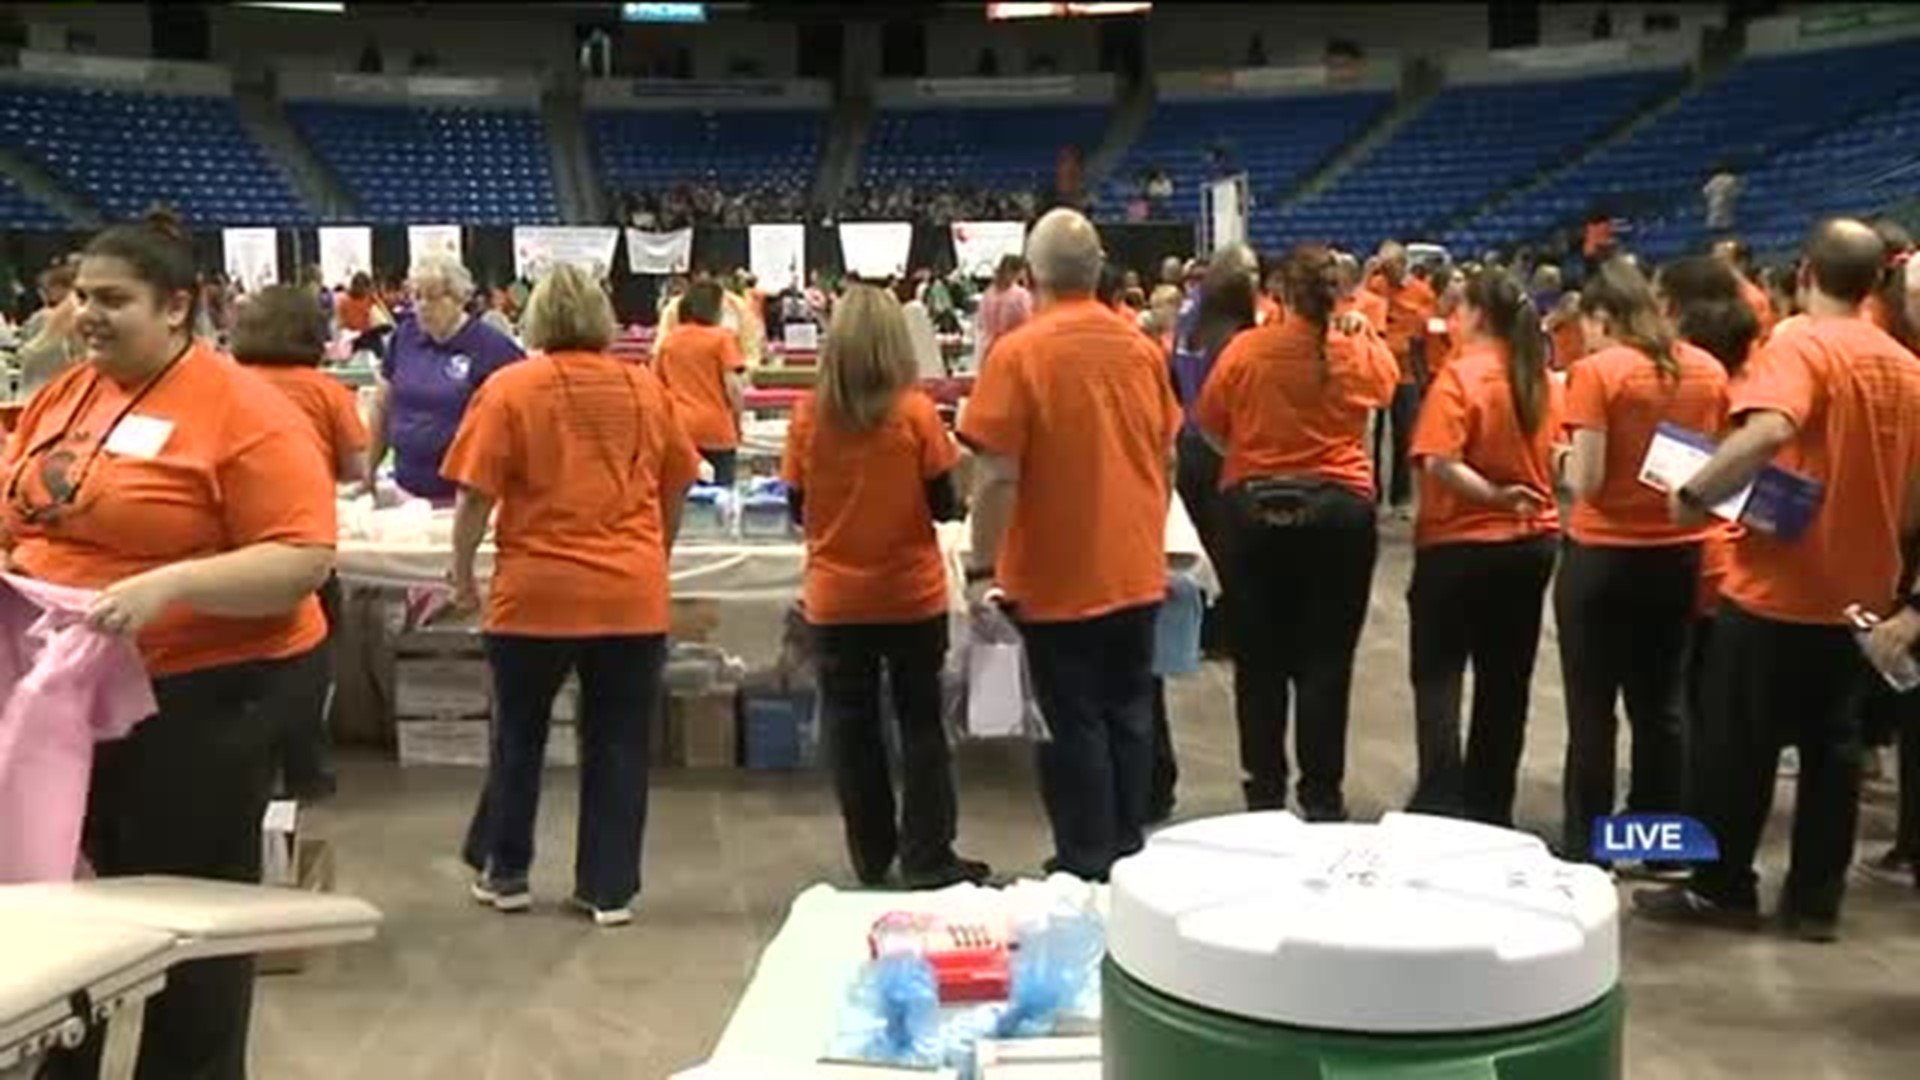 ‘MOMnPA’ Provides Free Dental Care to Thousands